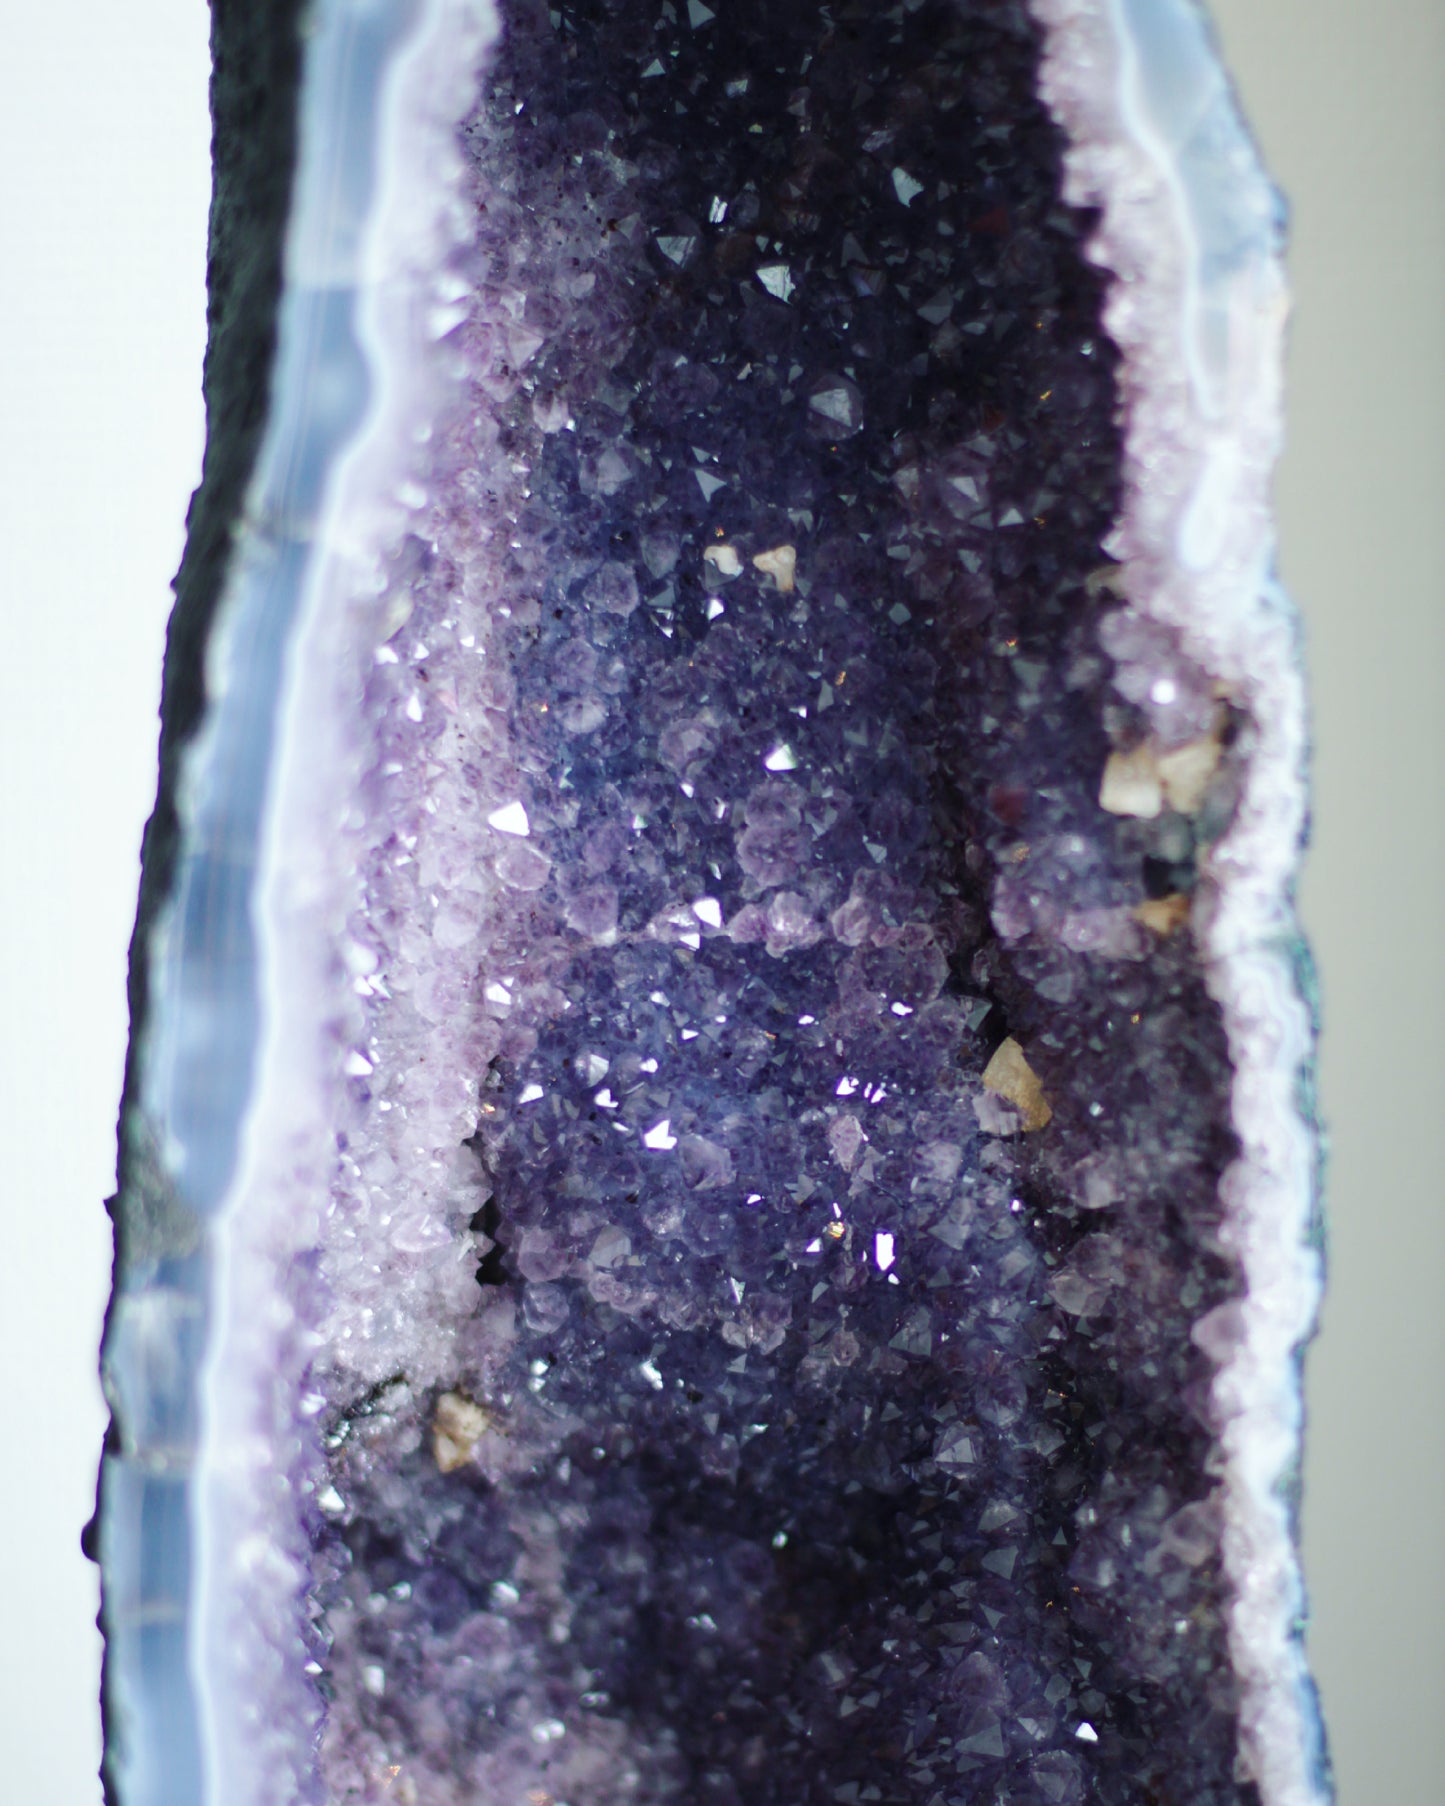 Large Amethyst Cave/Geod with calcite crystalls, close up